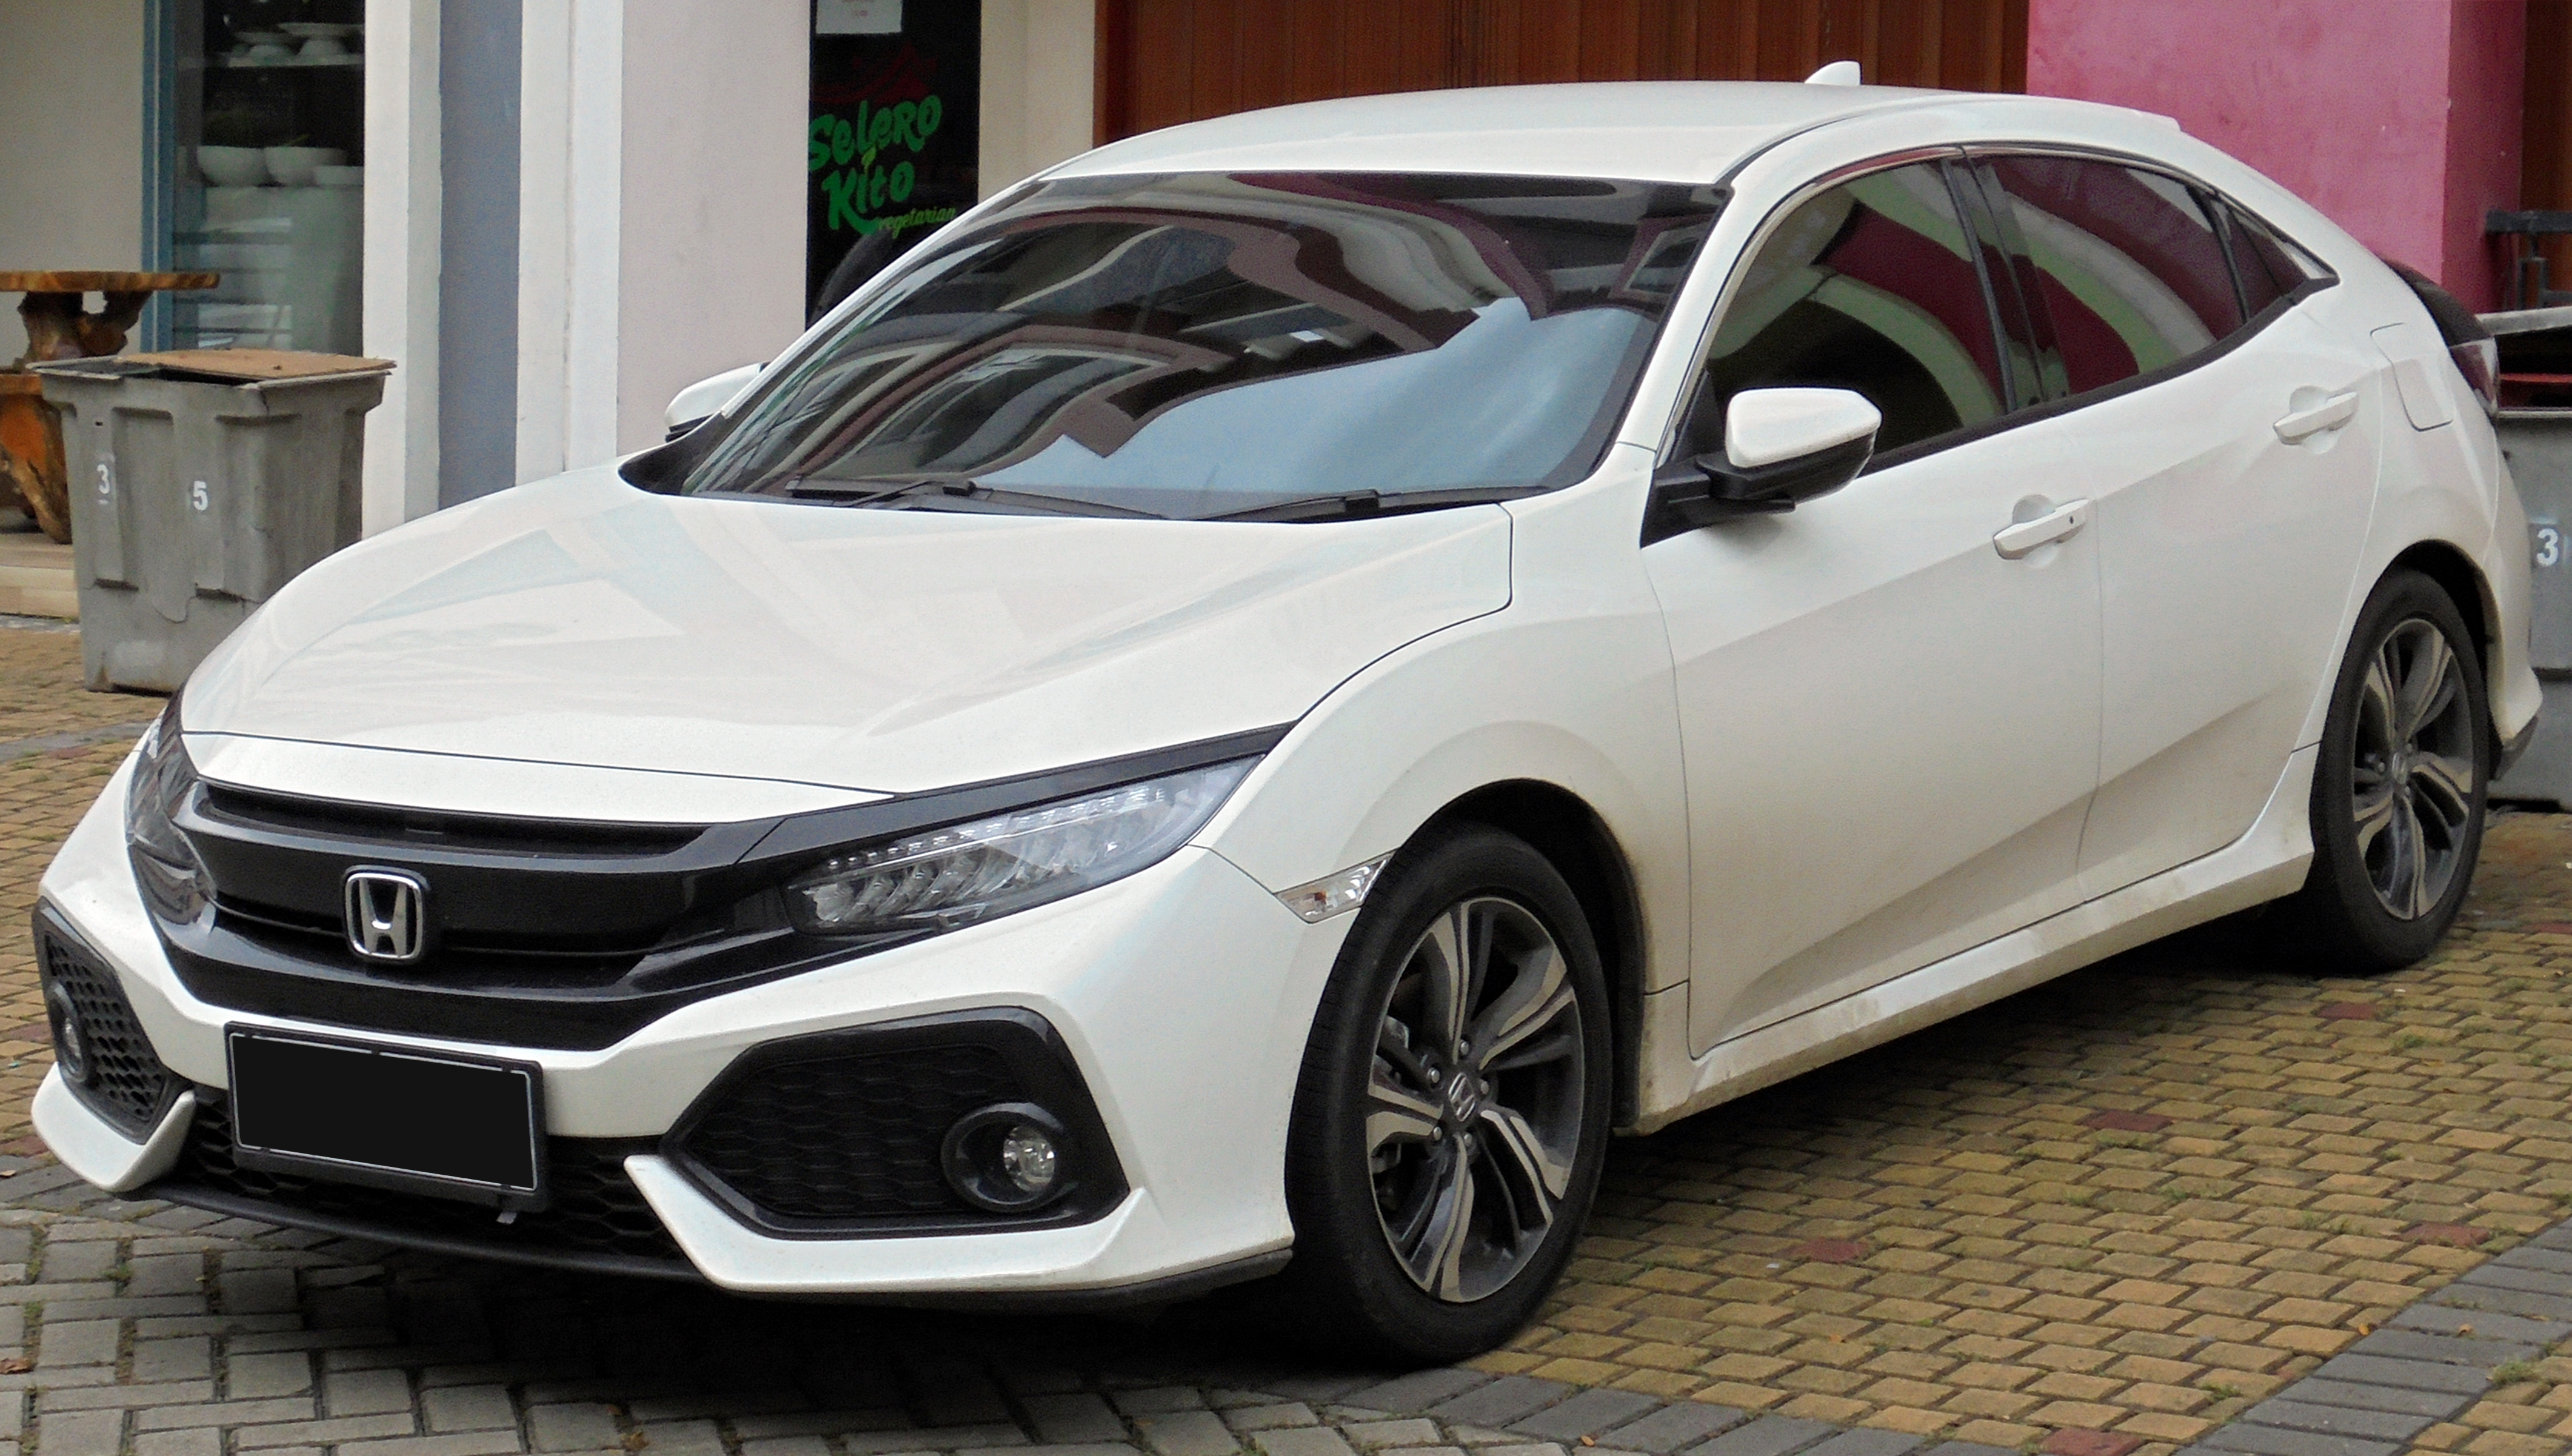 5 Best Aftermarket Mods For Honda Civics Ikreate Passions